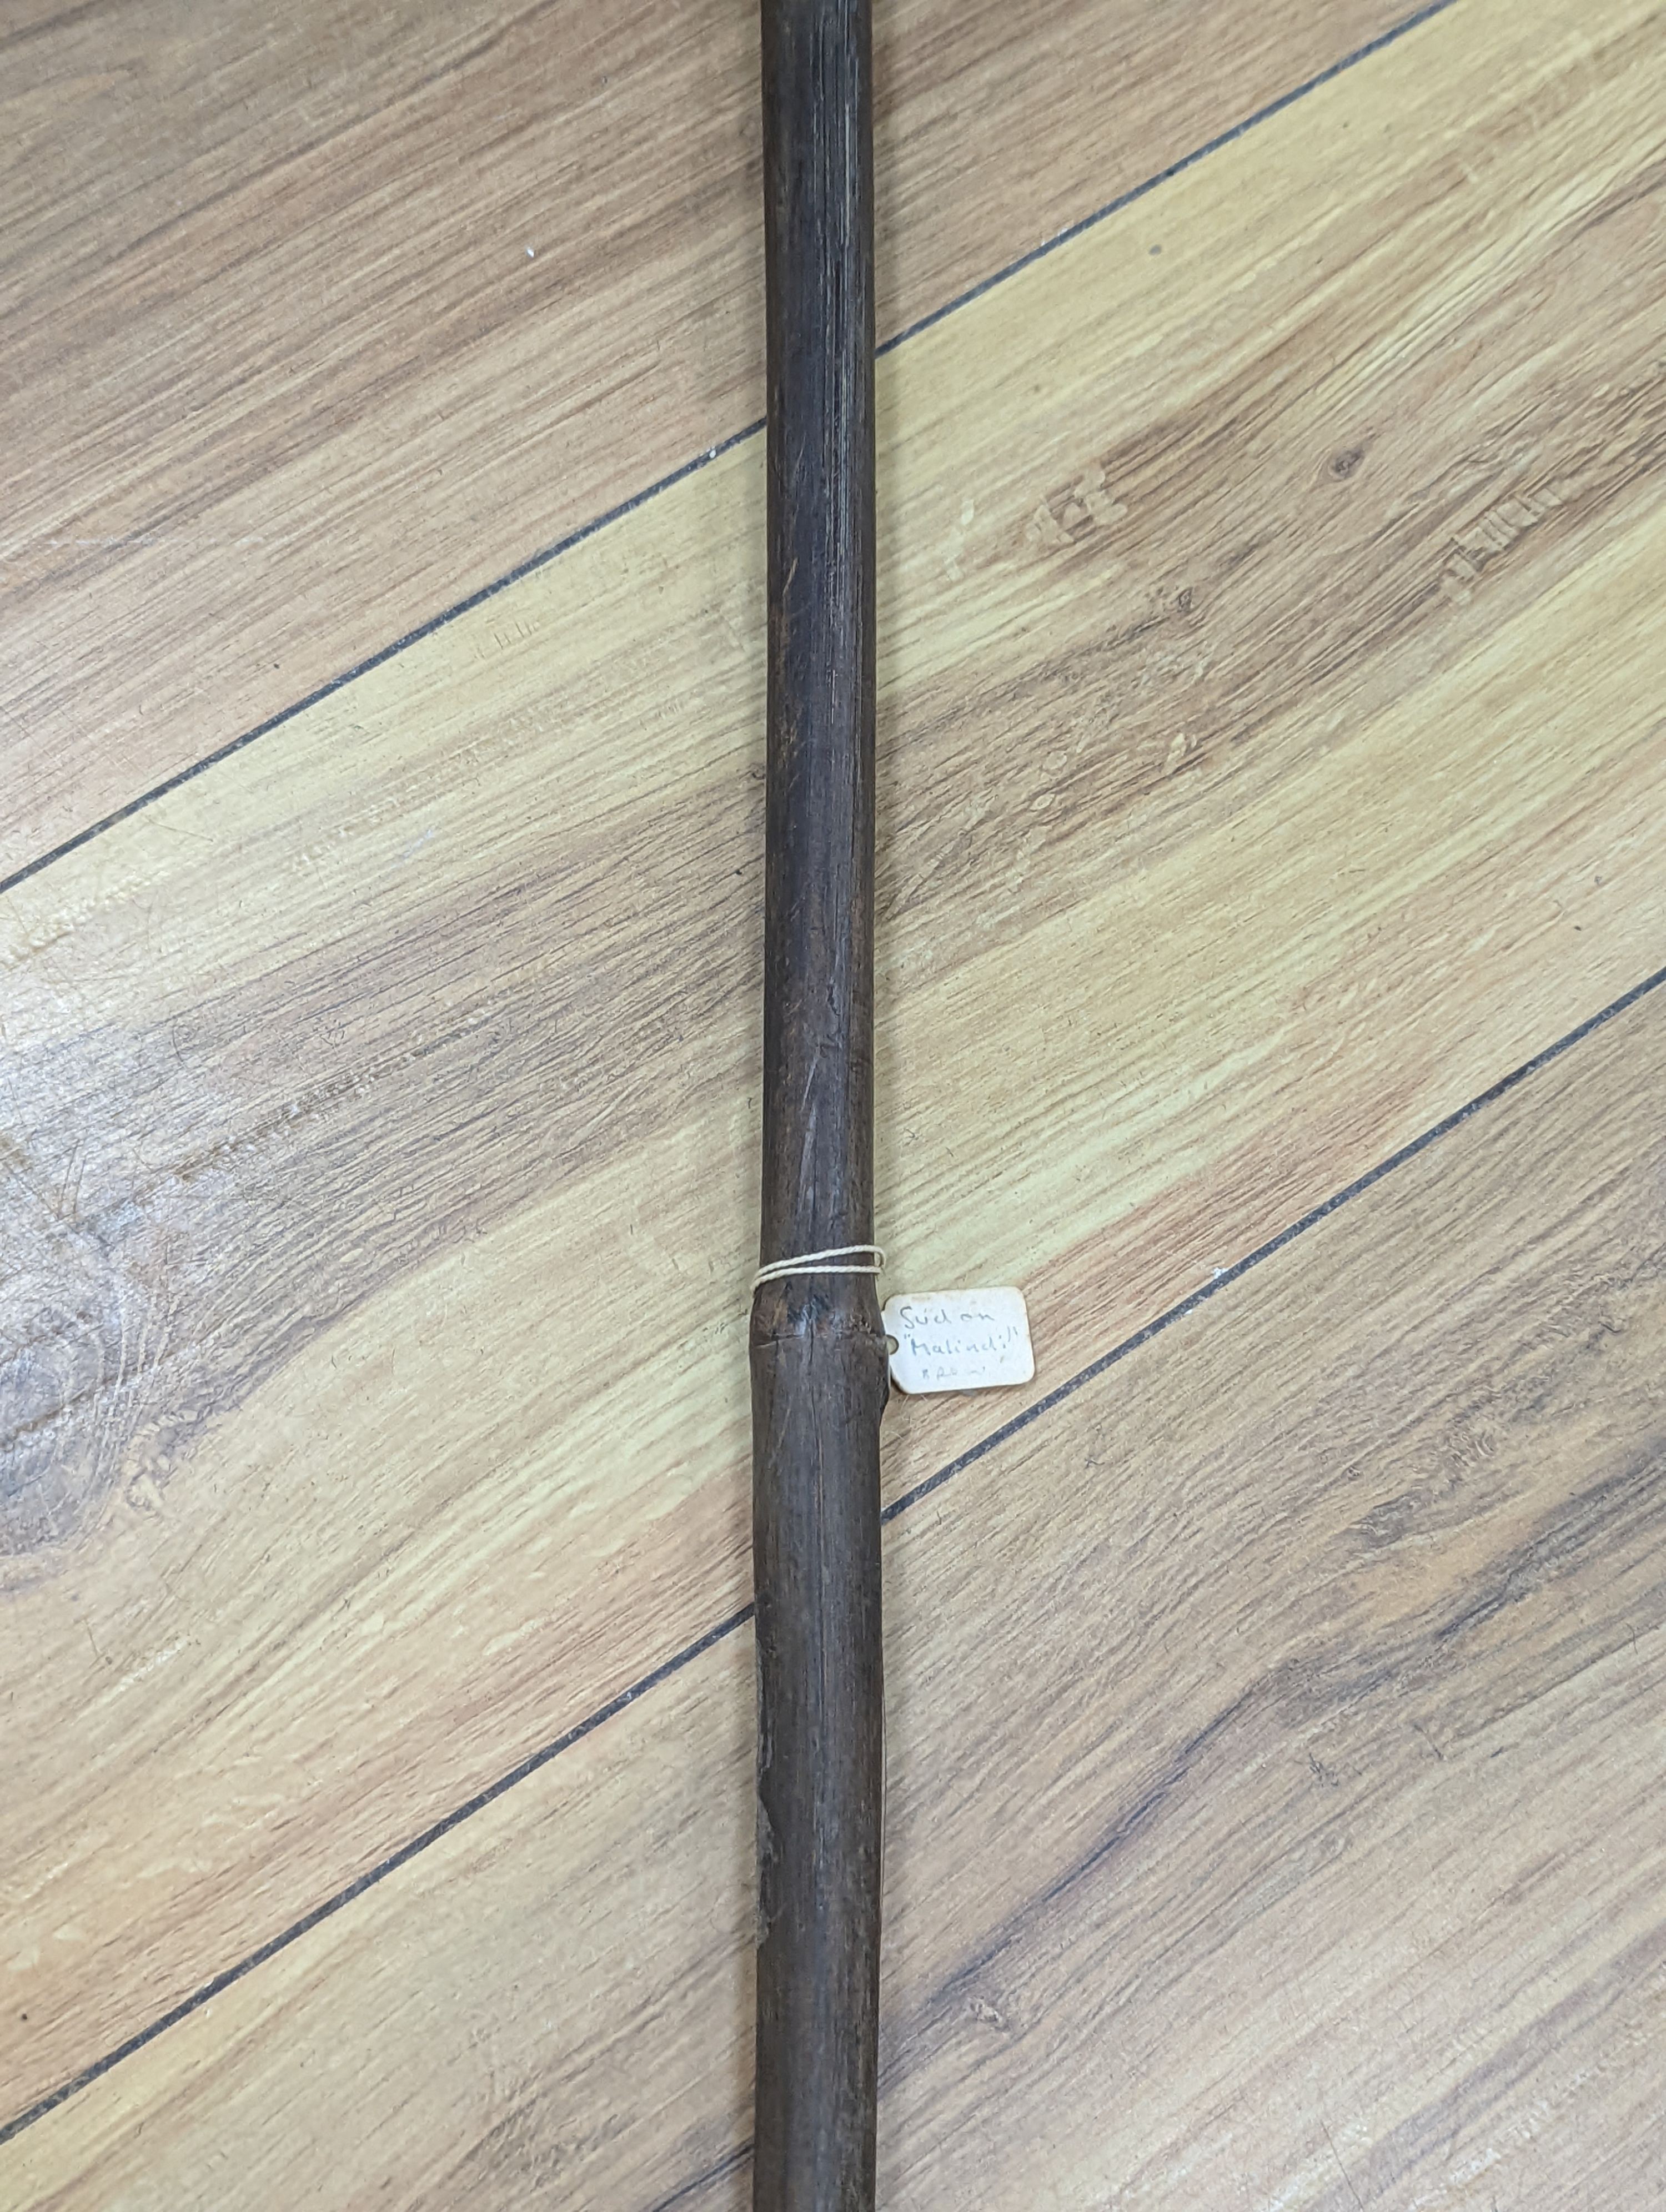 Two West African spears 236cm